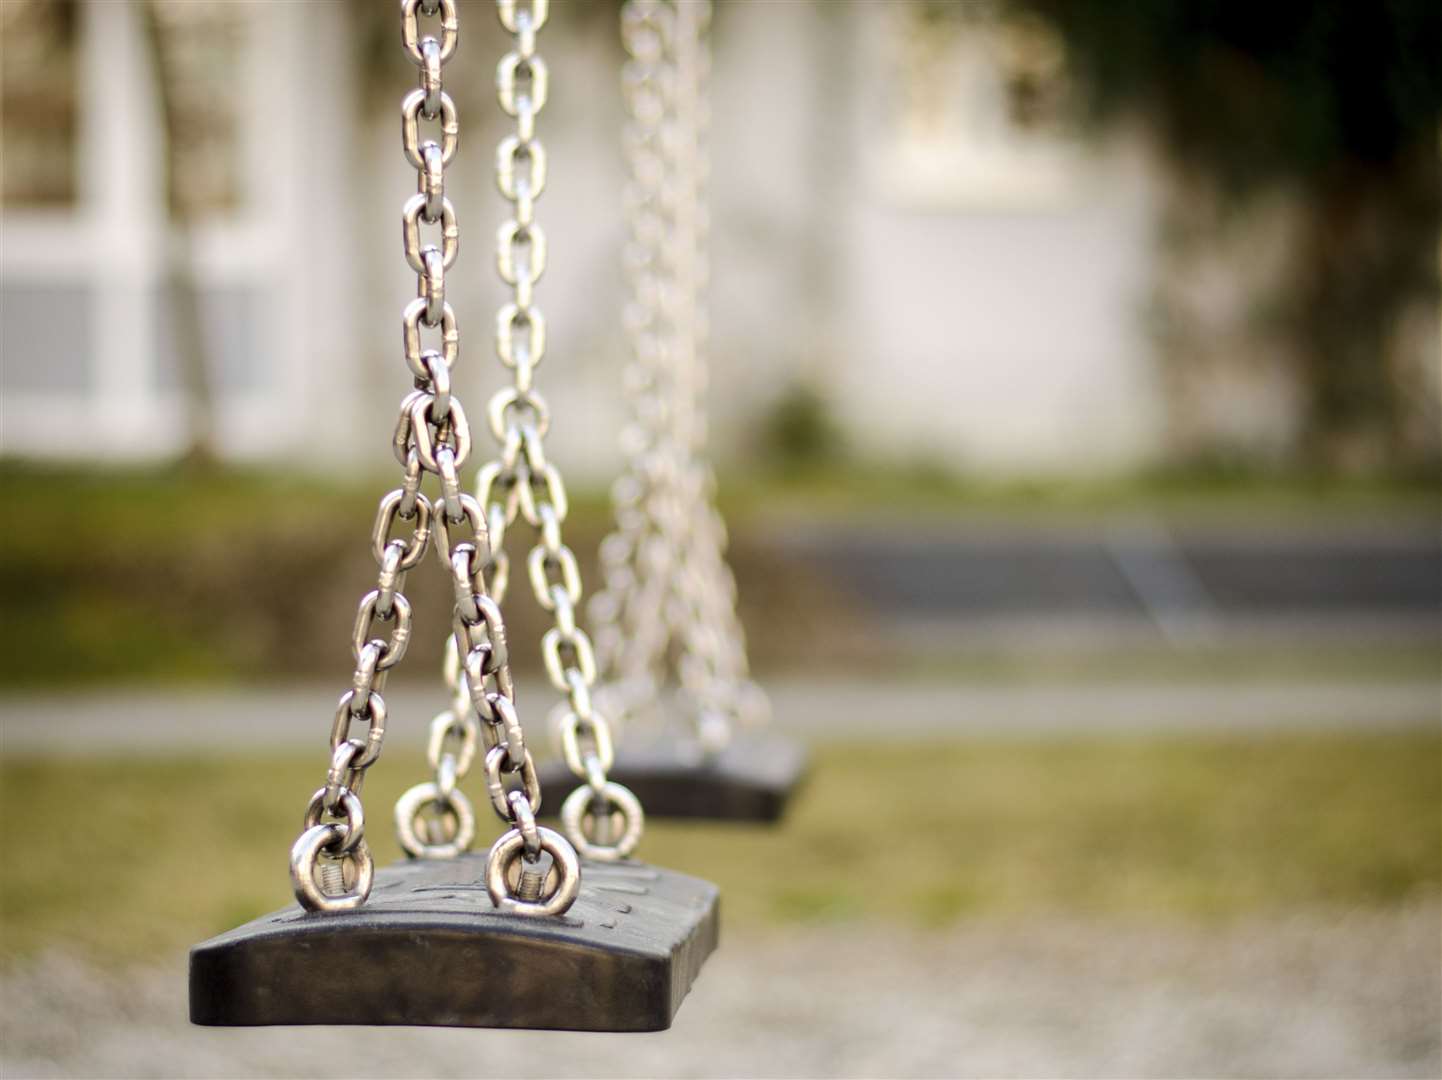 Two men allegedly approached children in a Chatham play park Stock picture: Getty Images/iStock